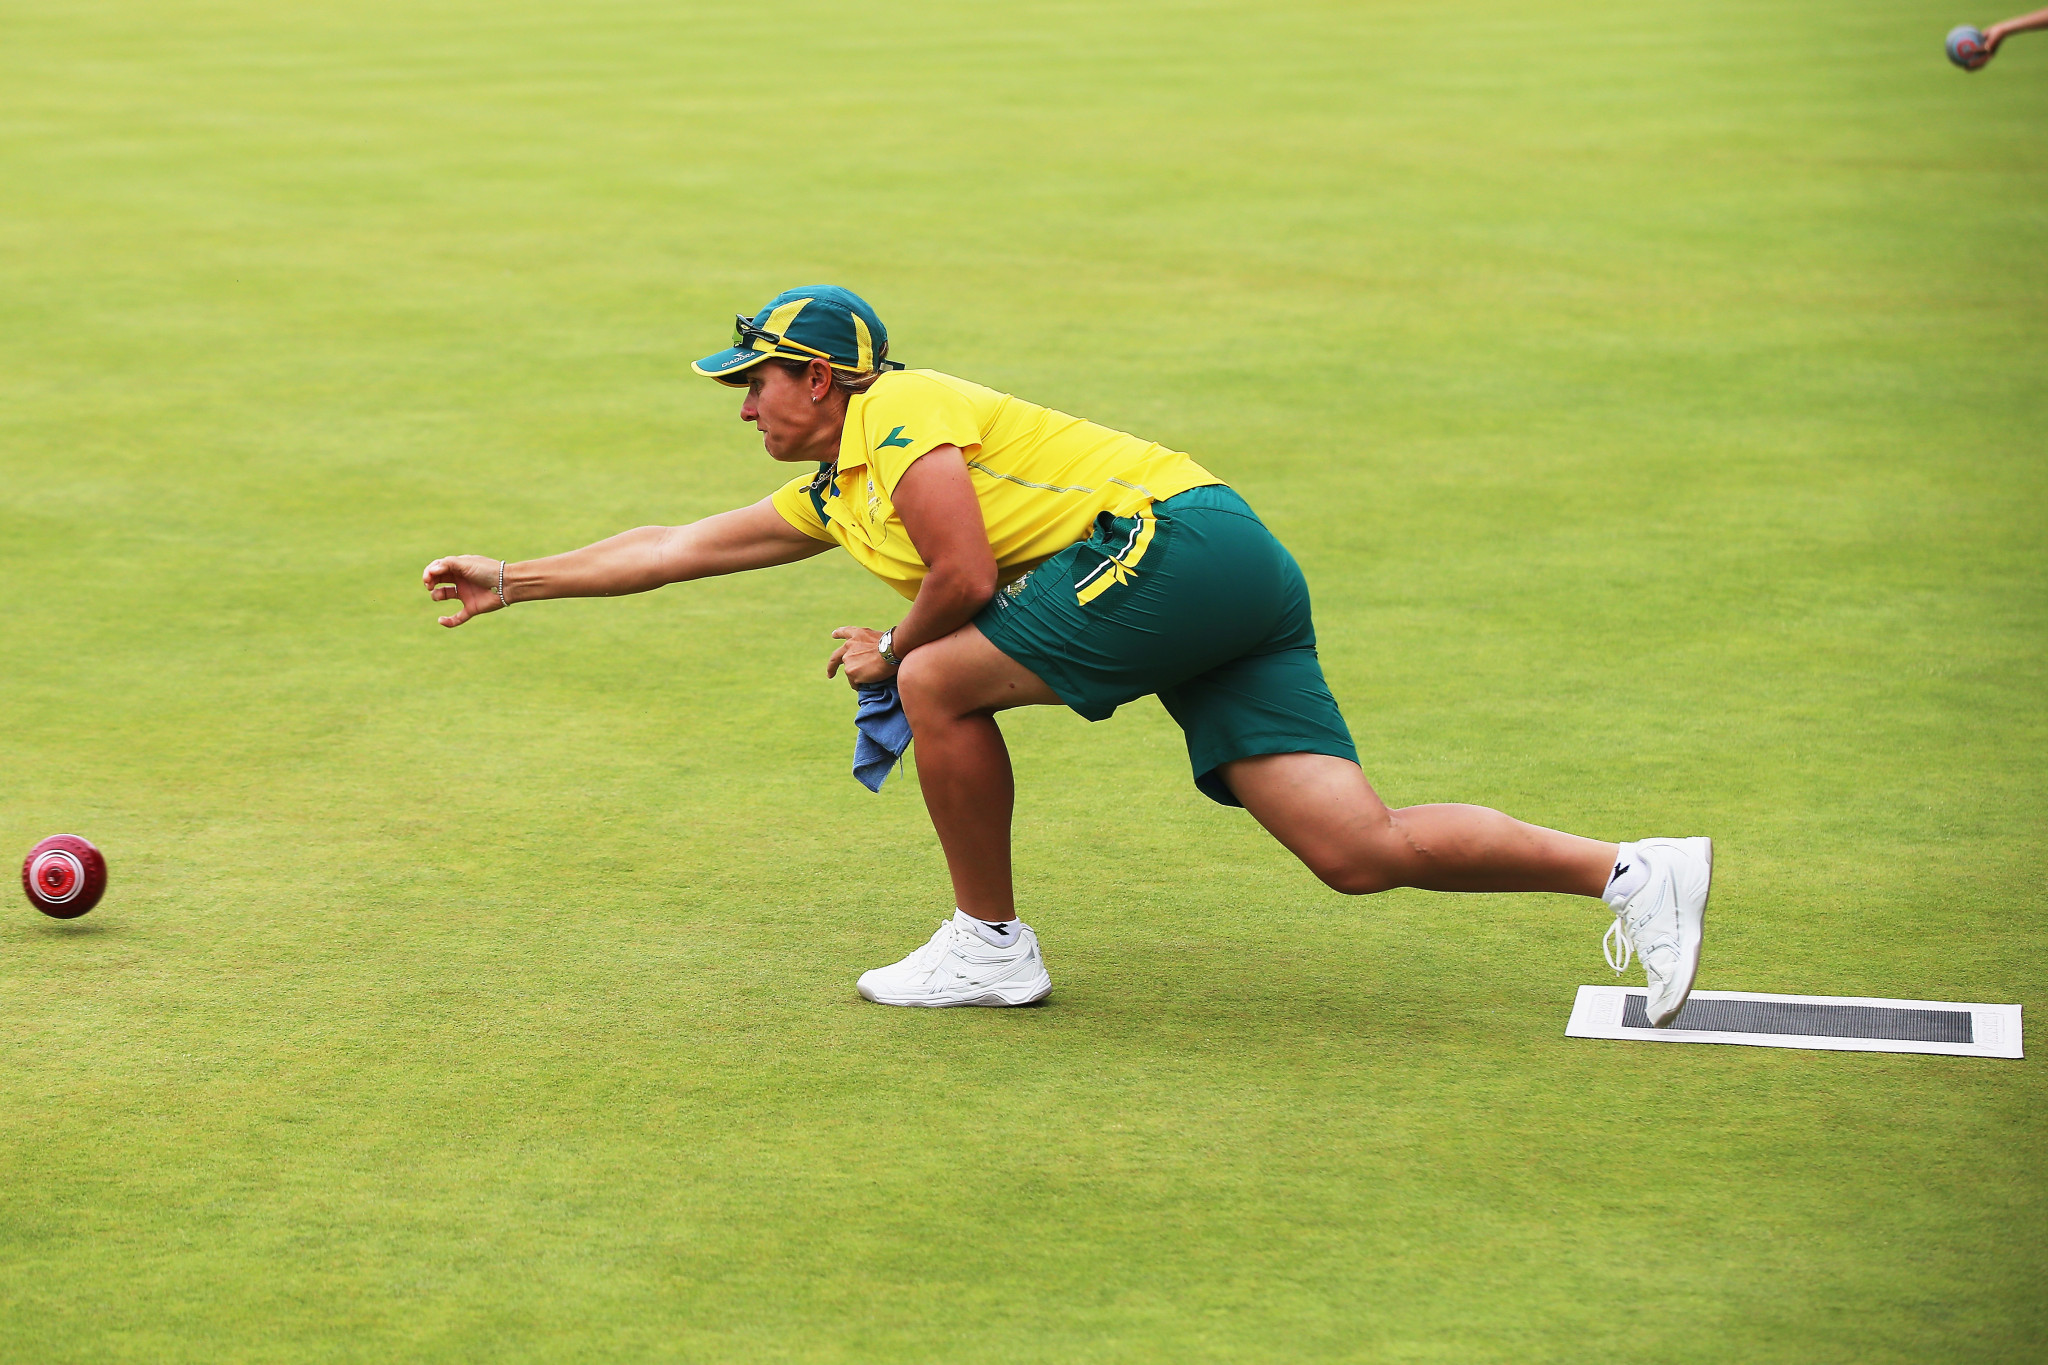 Murphy and Wilson chosen as Australian representatives in lawn bowls singles events at Gold Coast 2018